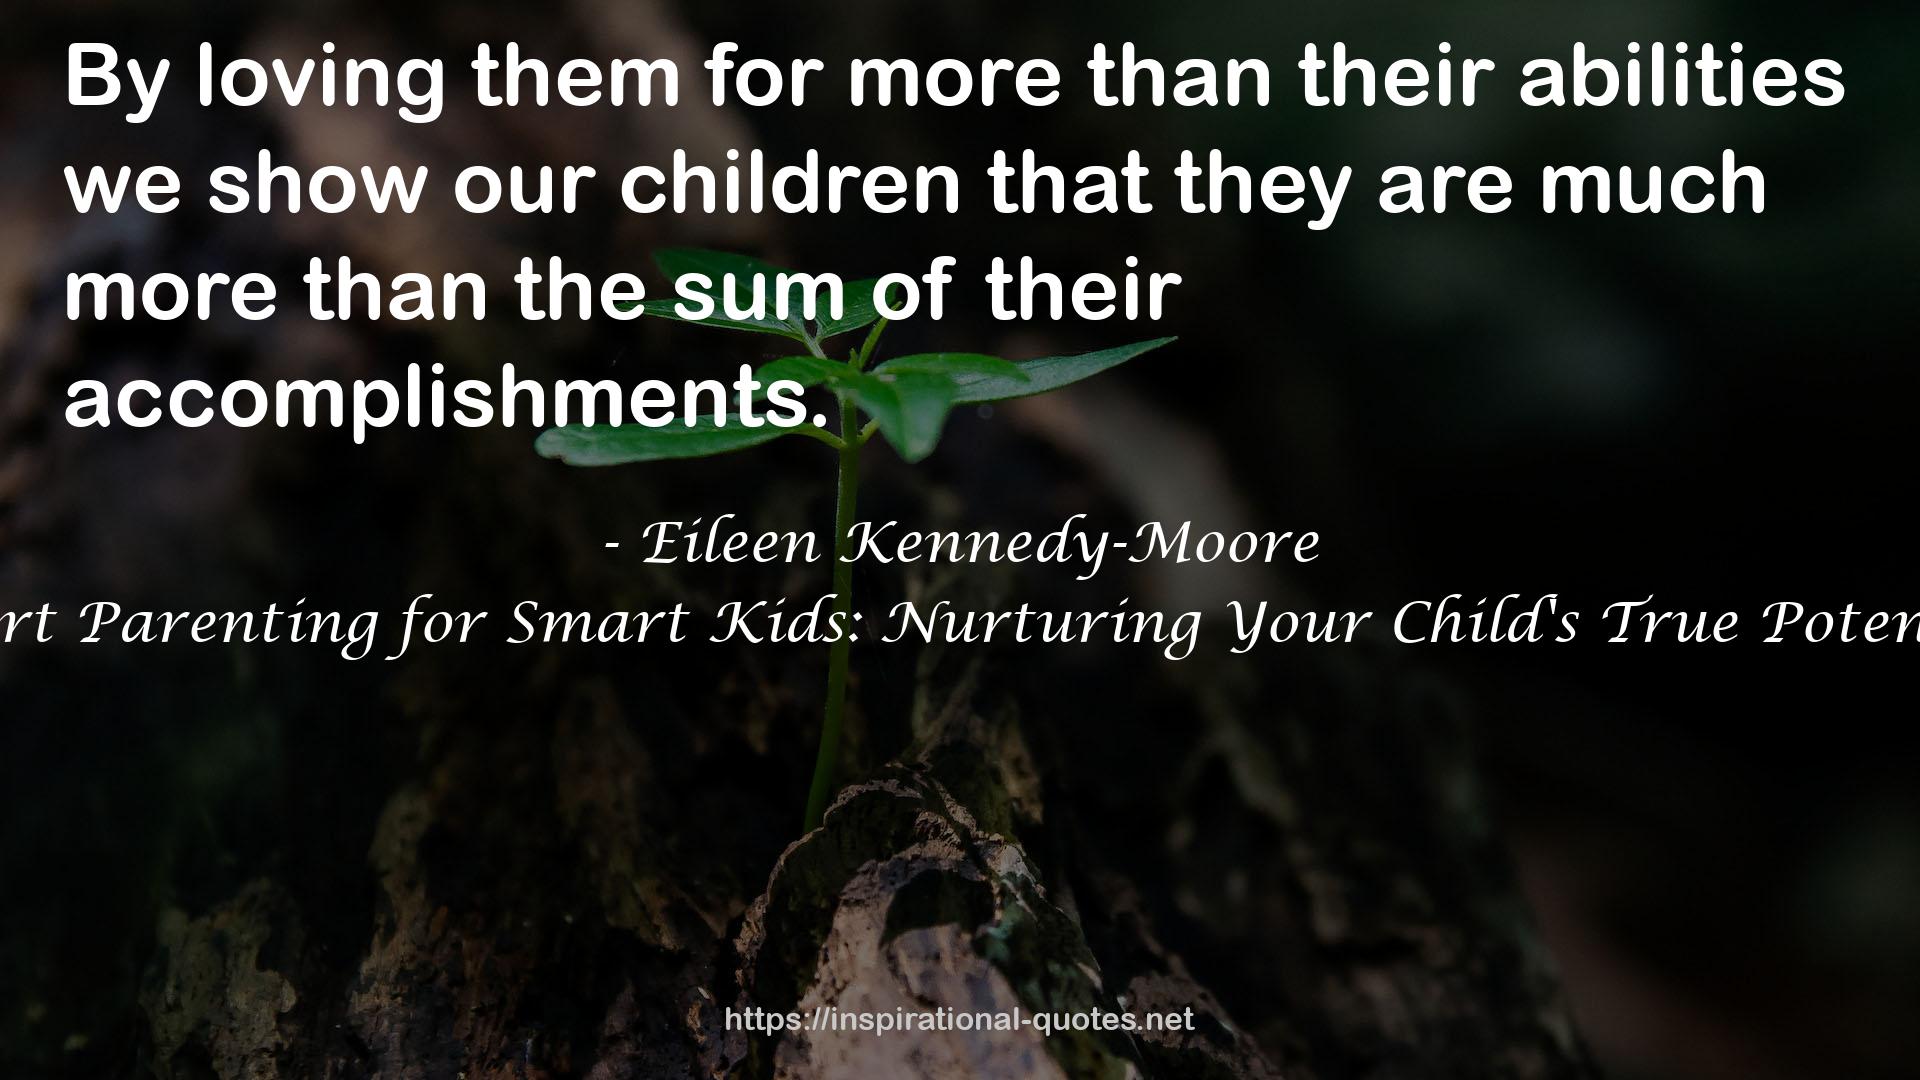 Eileen Kennedy-Moore QUOTES